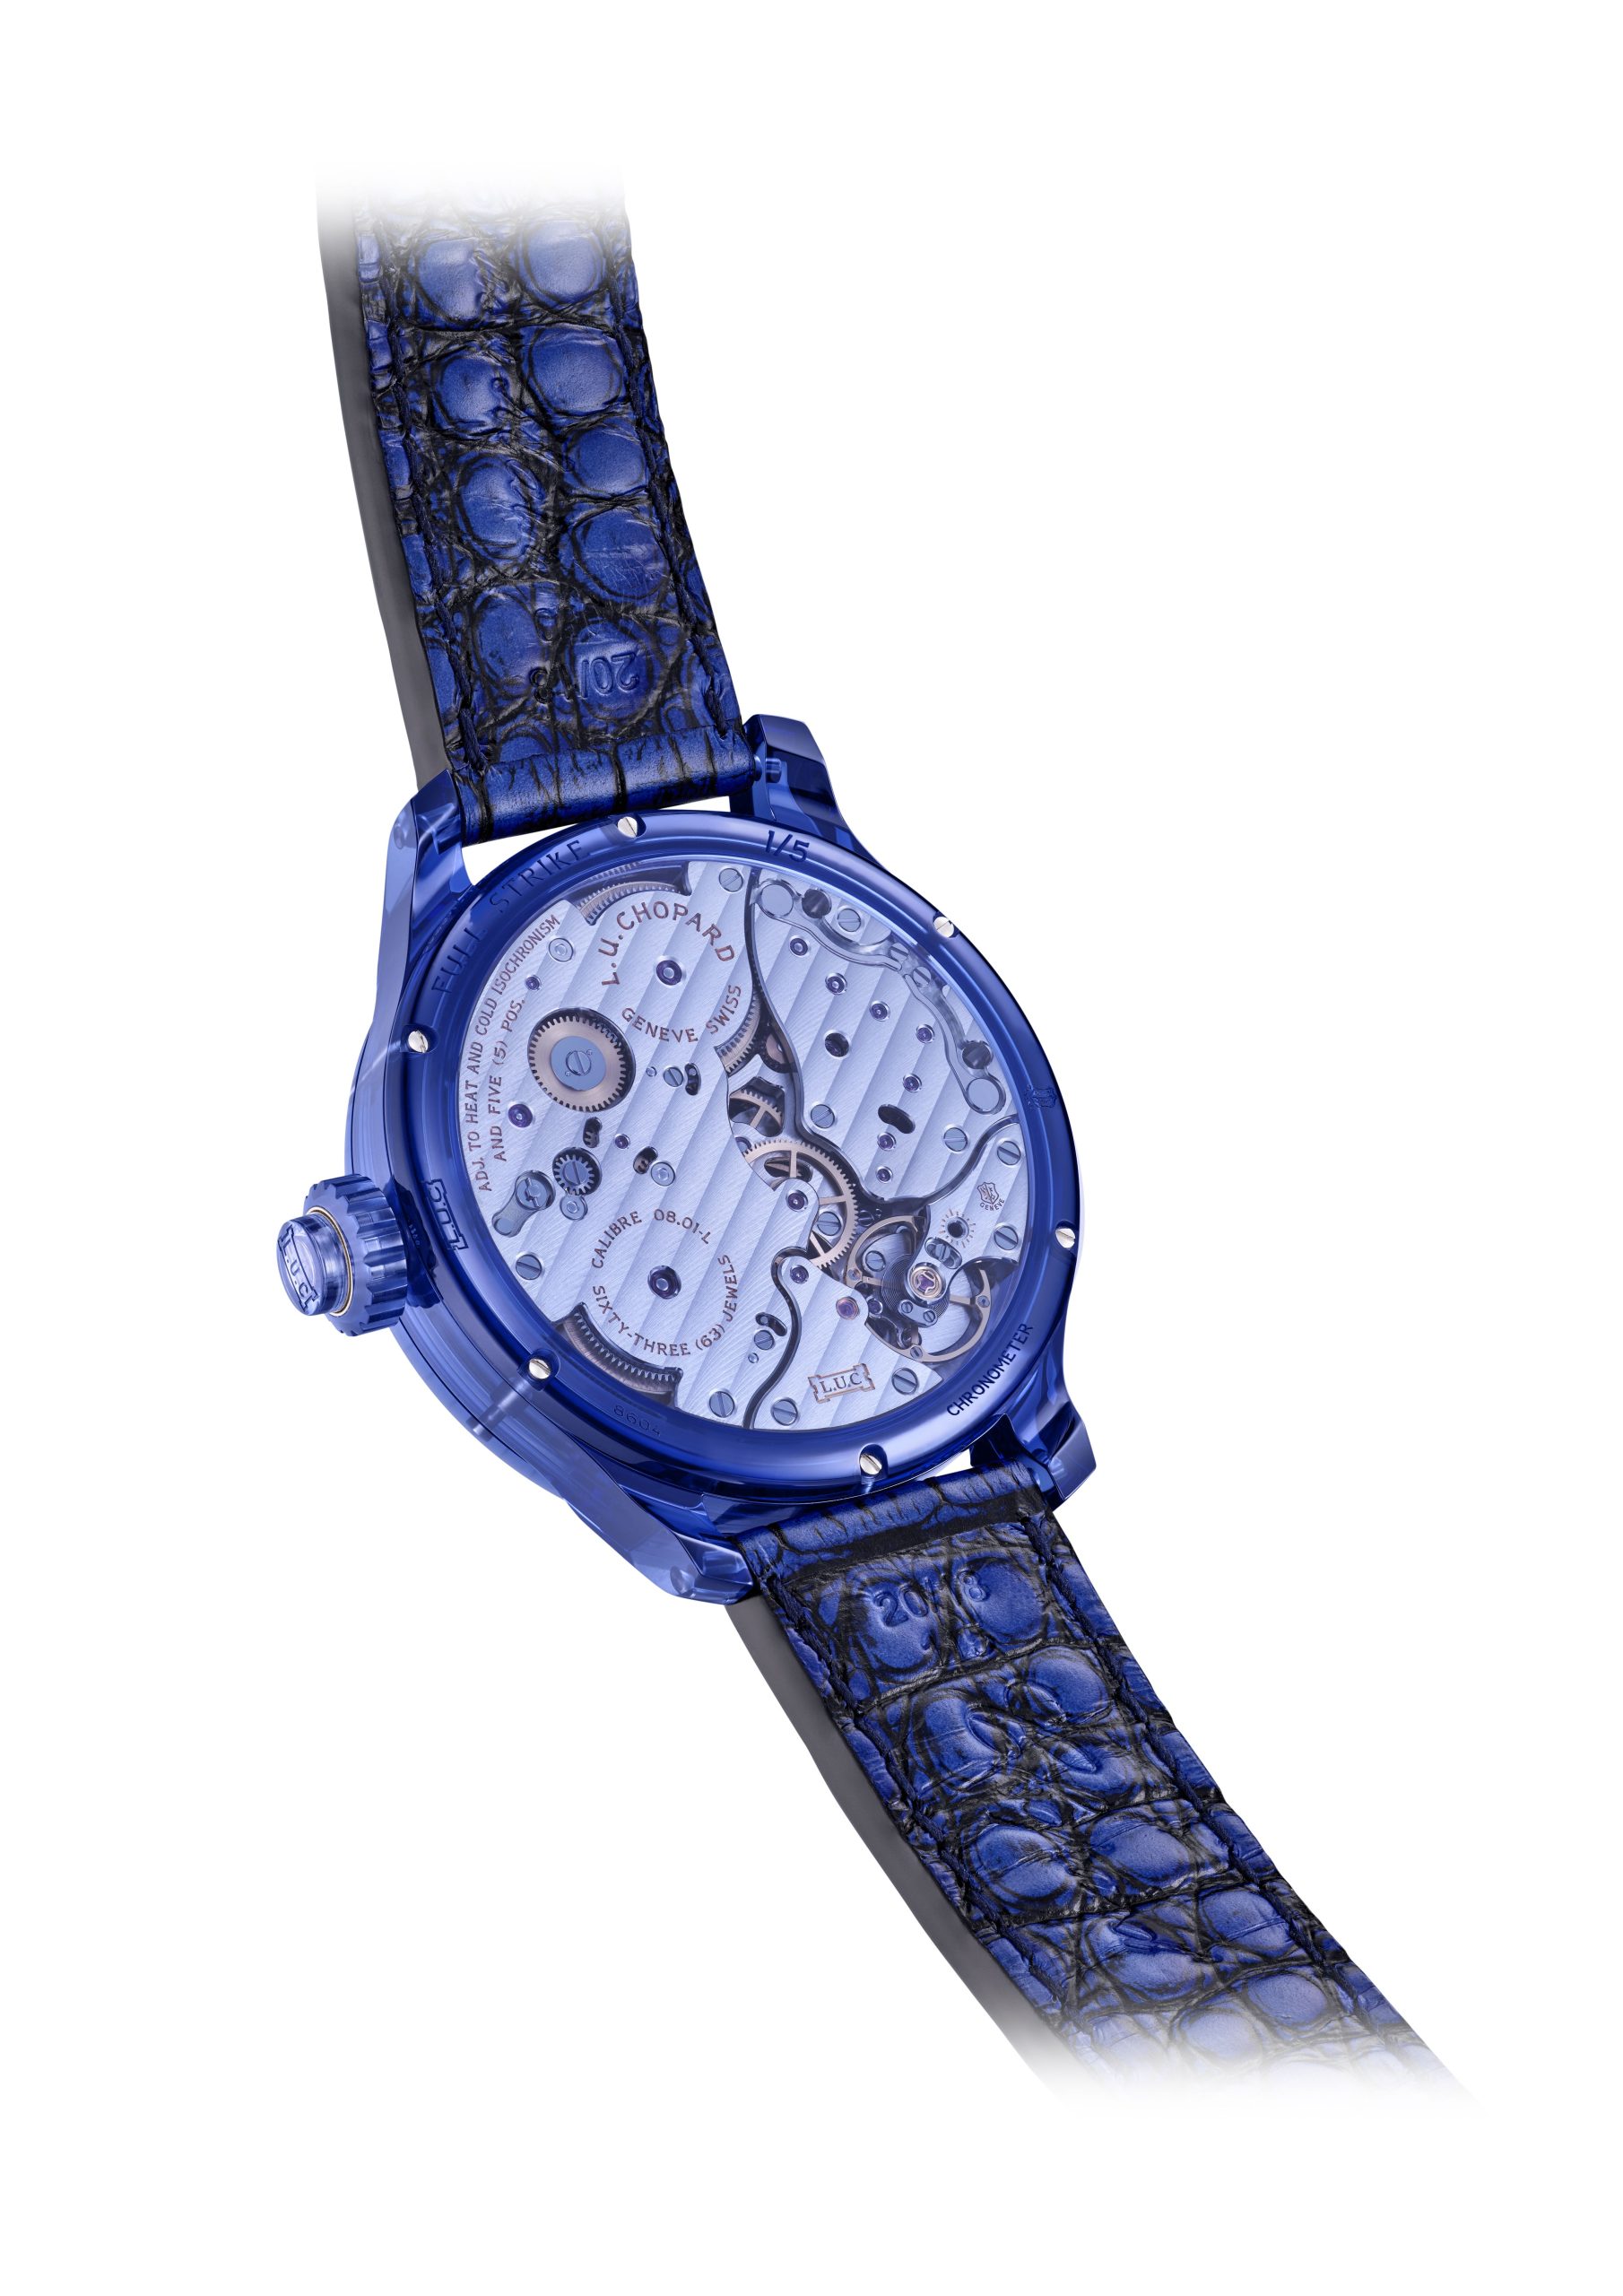 Time+Tide Watches - Congratulations to the superfun, supercompressor style  @louisvuitton Tambour Street Diver Skyline Blue for being a finalist in the  @gphg_official 2021 Diver's Category, alongside @doxawatchesofficial @oris  @ulyssenardinofficial